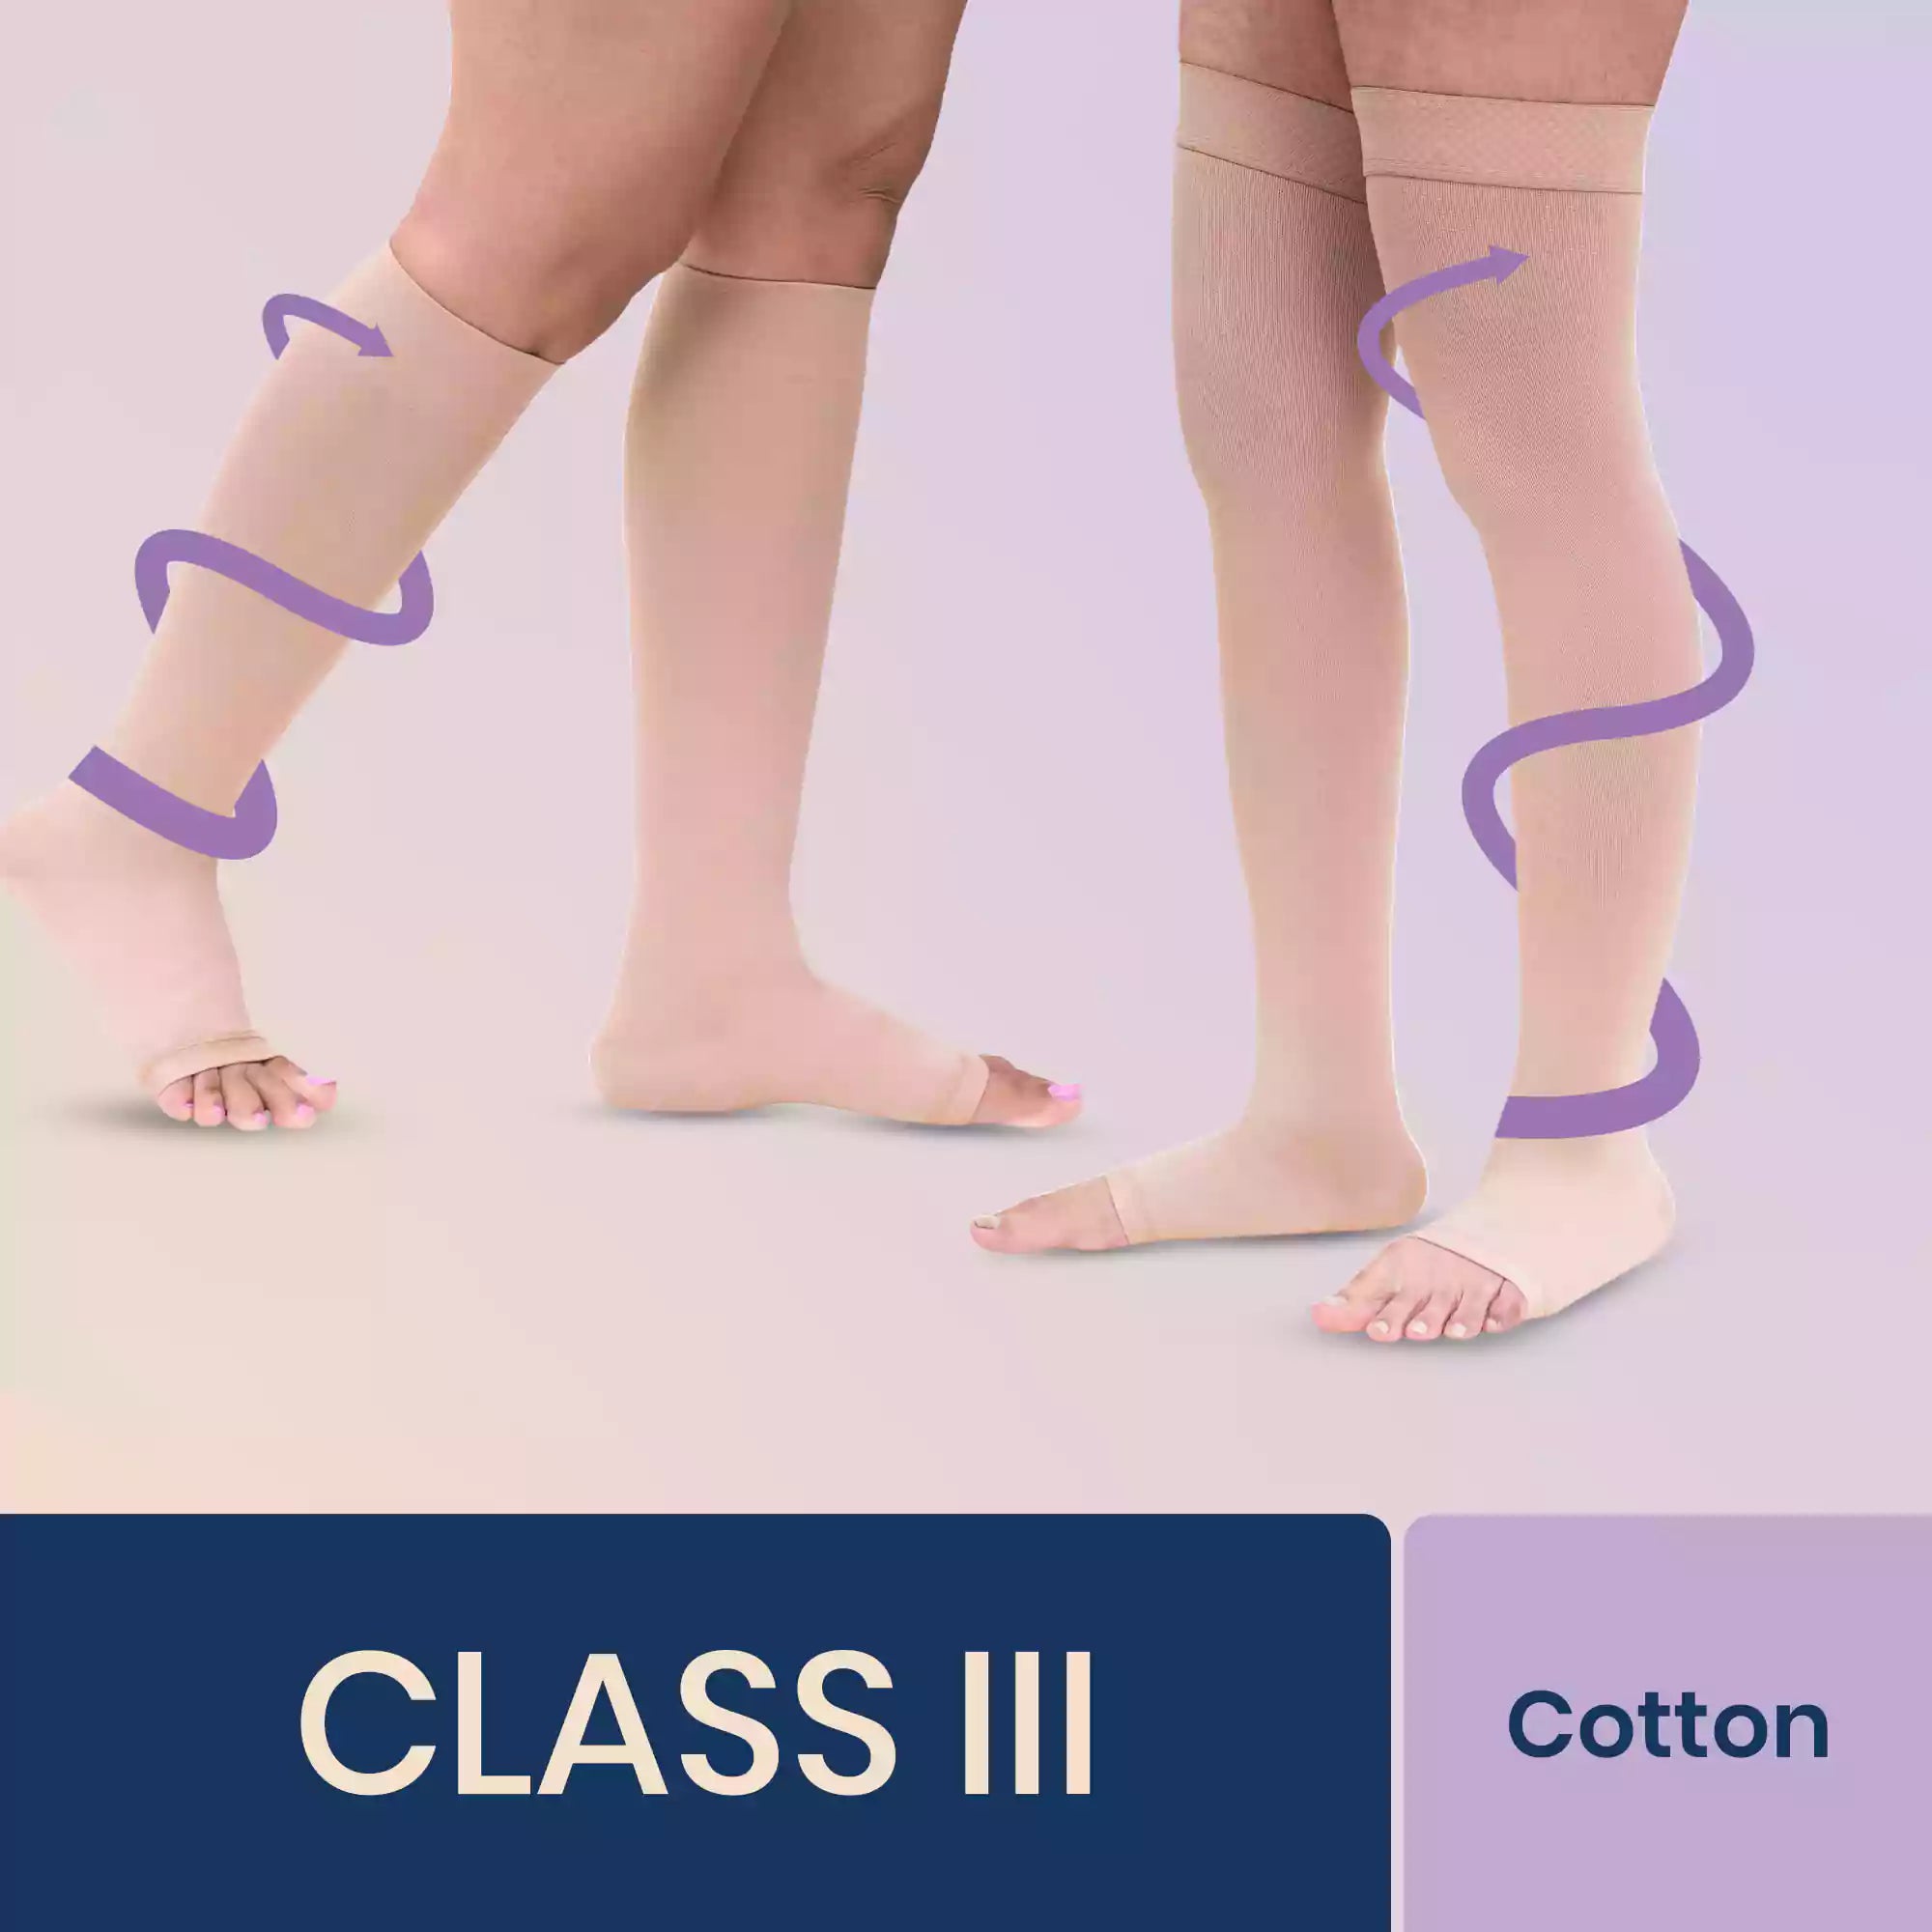 India's Best Varicose Veins Compression Stockings, Sorgen Royale Class II, Sorgen Sockings